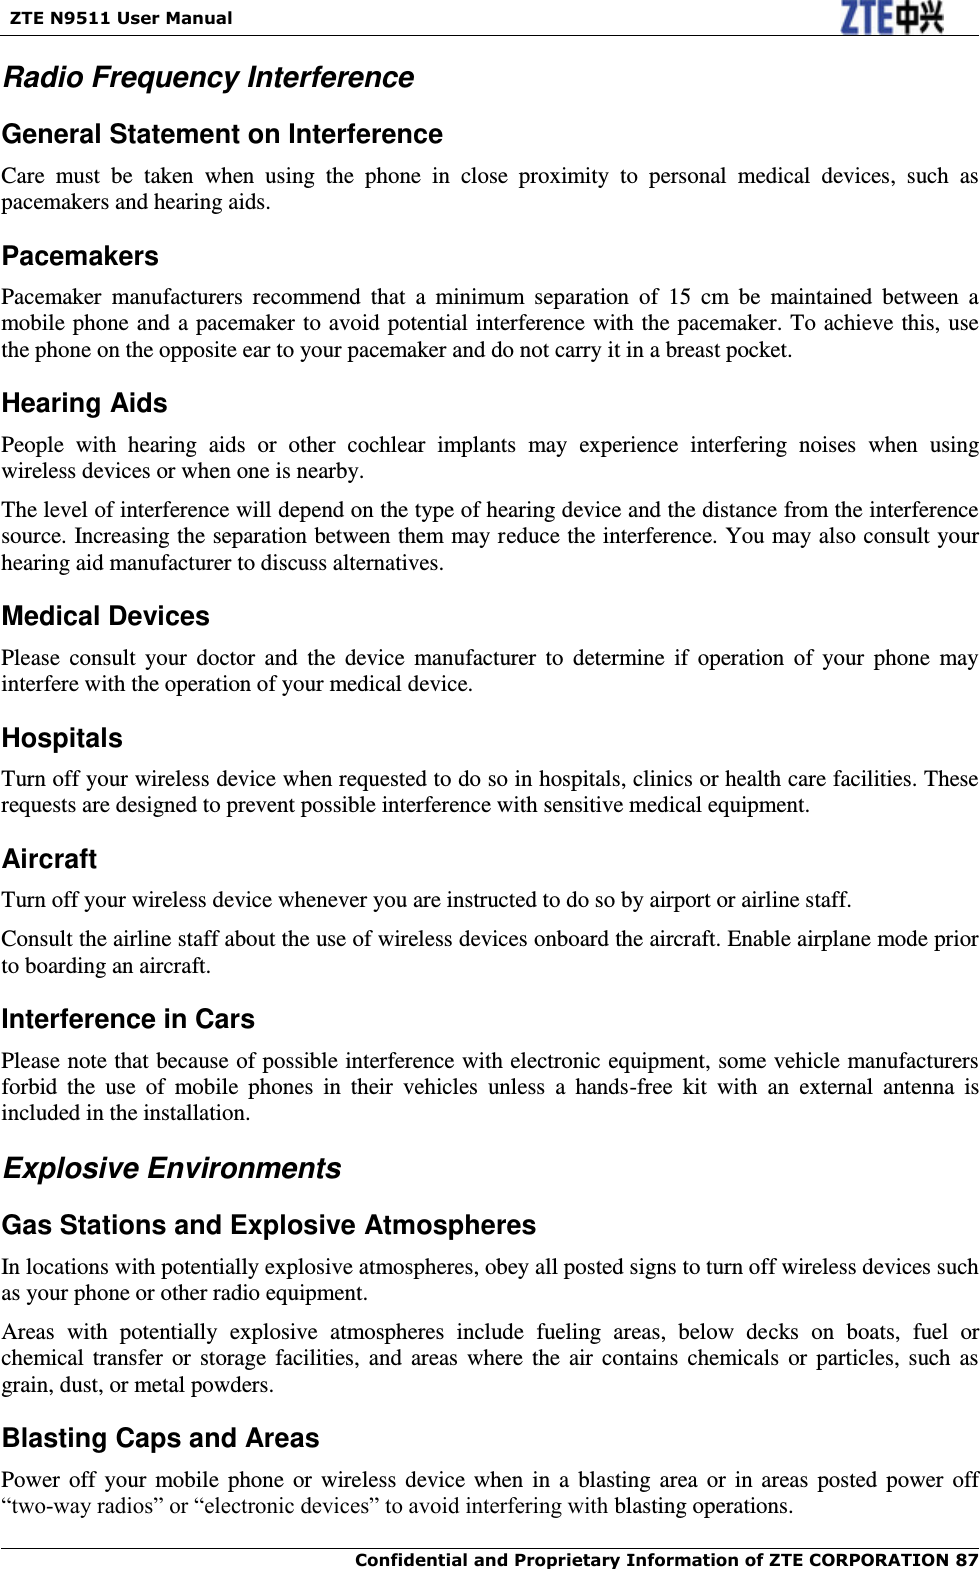   ZTE N9511 User Manual    Confidential and Proprietary Information of ZTE CORPORATION 87 Radio Frequency Interference General Statement on Interference Care  must  be  taken  when  using  the  phone  in  close  proximity  to  personal  medical  devices,  such  as pacemakers and hearing aids. Pacemakers Pacemaker  manufacturers  recommend  that  a  minimum  separation  of  15  cm  be  maintained  between  a mobile phone and a pacemaker to avoid potential interference with the pacemaker. To achieve this, use the phone on the opposite ear to your pacemaker and do not carry it in a breast pocket. Hearing Aids People  with  hearing  aids  or  other  cochlear  implants  may  experience  interfering  noises  when  using wireless devices or when one is nearby. The level of interference will depend on the type of hearing device and the distance from the interference source. Increasing the separation between them may reduce the interference. You may also consult your hearing aid manufacturer to discuss alternatives. Medical Devices Please  consult  your  doctor  and  the  device  manufacturer  to  determine  if  operation  of  your  phone  may interfere with the operation of your medical device. Hospitals Turn off your wireless device when requested to do so in hospitals, clinics or health care facilities. These requests are designed to prevent possible interference with sensitive medical equipment. Aircraft Turn off your wireless device whenever you are instructed to do so by airport or airline staff. Consult the airline staff about the use of wireless devices onboard the aircraft. Enable airplane mode prior to boarding an aircraft. Interference in Cars Please note that because of possible interference with electronic equipment, some vehicle manufacturers forbid  the  use  of  mobile  phones  in  their  vehicles  unless  a  hands-free  kit  with  an  external  antenna  is included in the installation. Explosive Environments Gas Stations and Explosive Atmospheres In locations with potentially explosive atmospheres, obey all posted signs to turn off wireless devices such as your phone or other radio equipment. Areas  with  potentially  explosive  atmospheres  include  fueling  areas,  below  decks  on  boats,  fuel  or chemical transfer or  storage  facilities,  and  areas  where  the  air  contains  chemicals  or  particles,  such  as grain, dust, or metal powders. Blasting Caps and Areas Power  off  your mobile phone or  wireless device  when  in  a  blasting area or in areas  posted power off “two-way radios” or “electronic devices” to avoid interfering with blasting operations. 